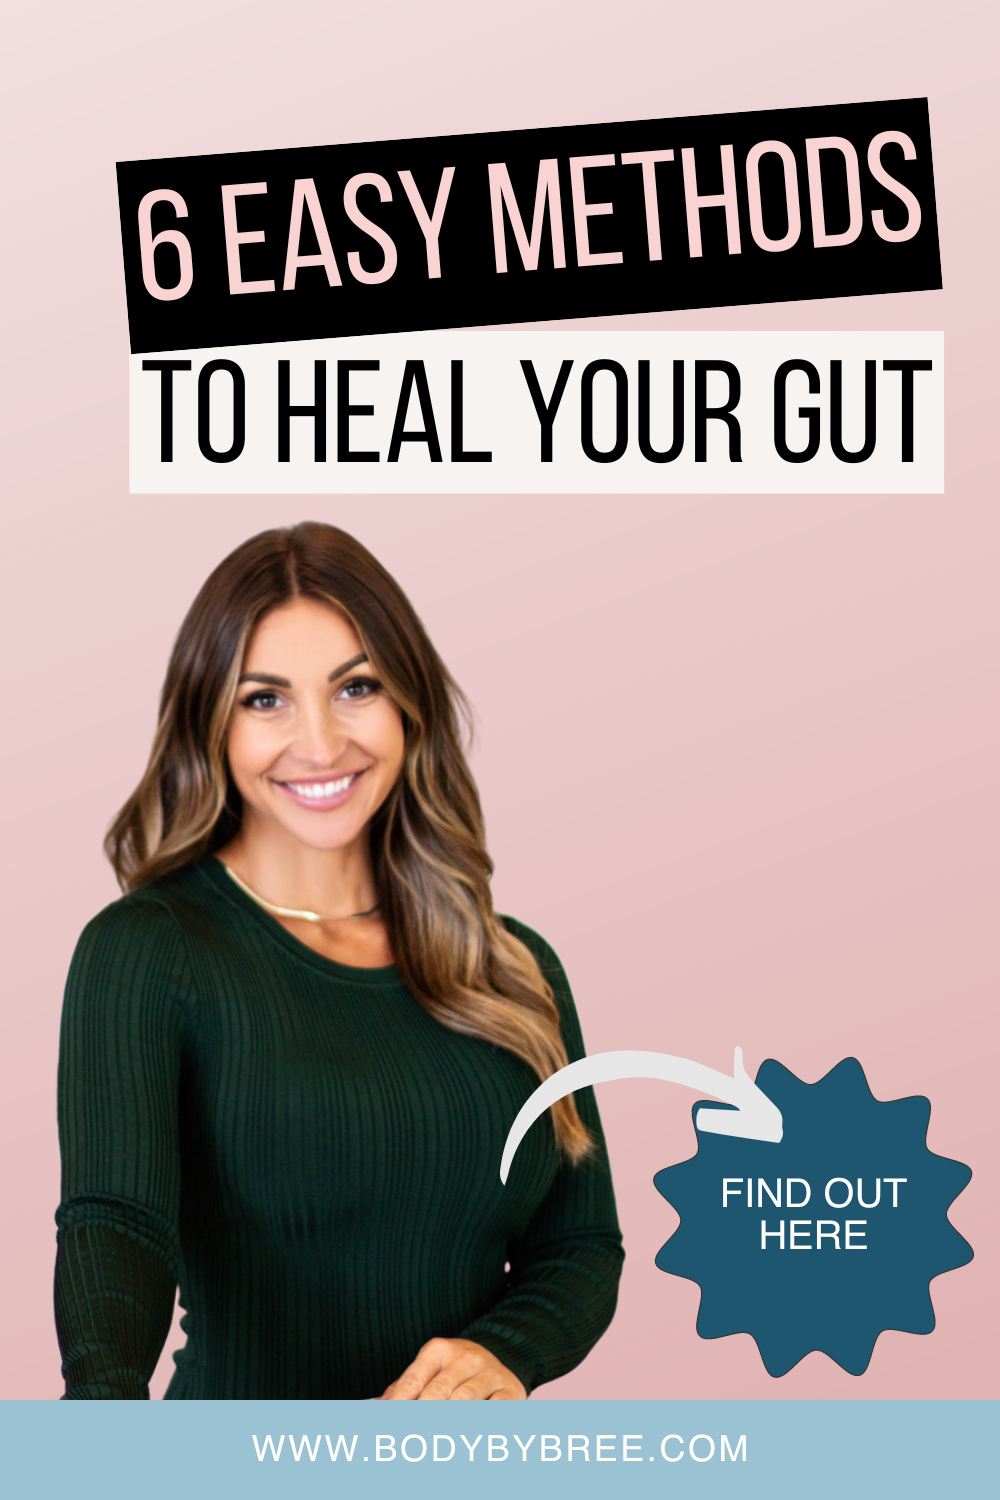 TAKE CONTROL OF YOUR GUT HEALTH: 6 EASY METHODS TO HEAL YOUR GUT